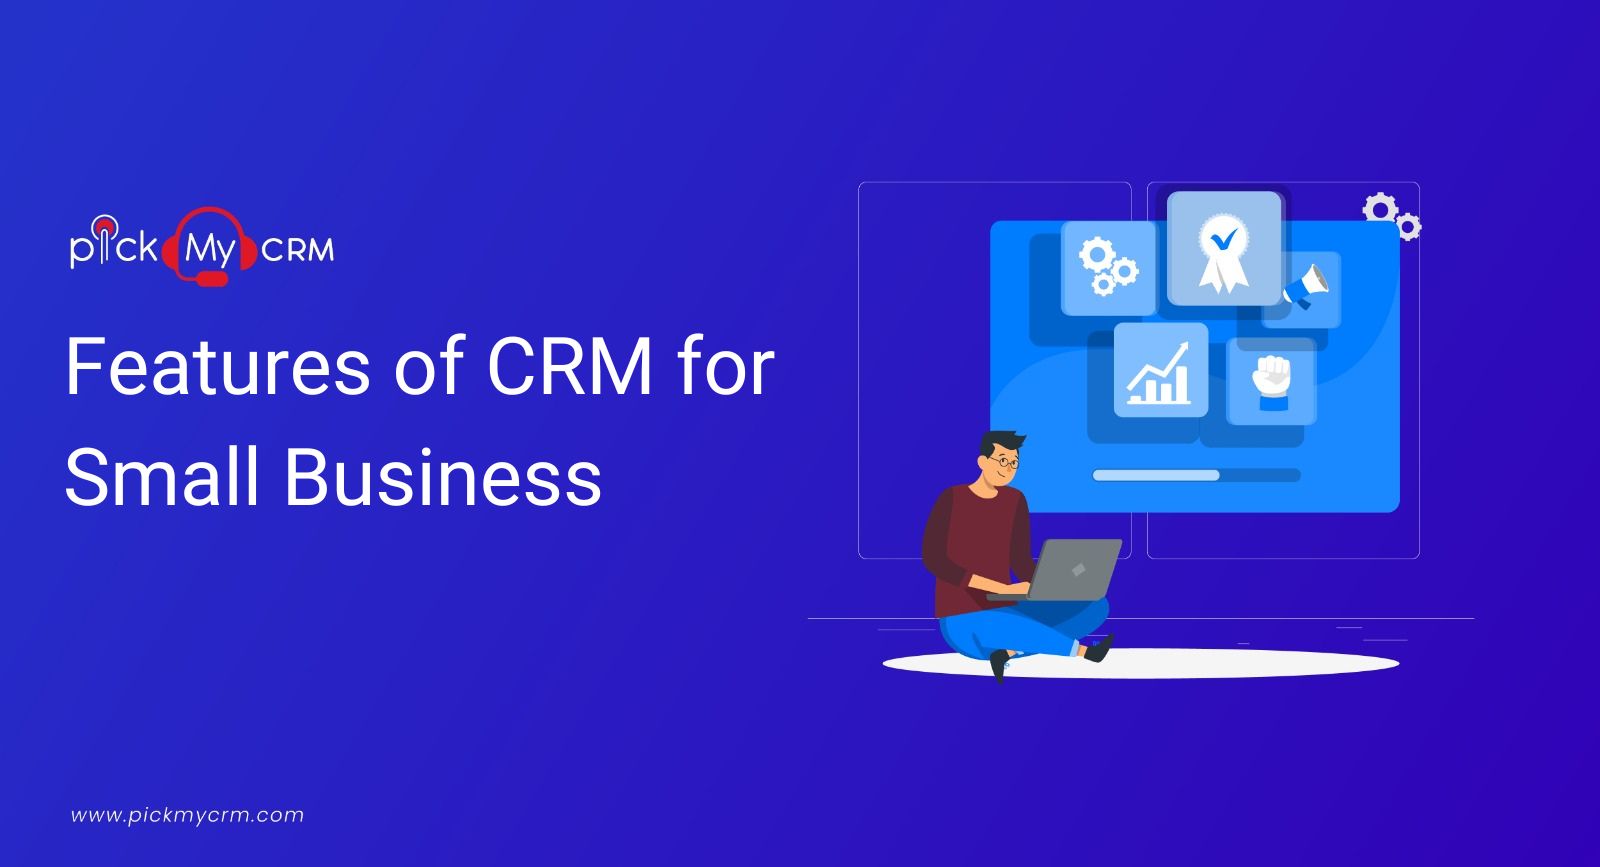 Features of CRM for small business